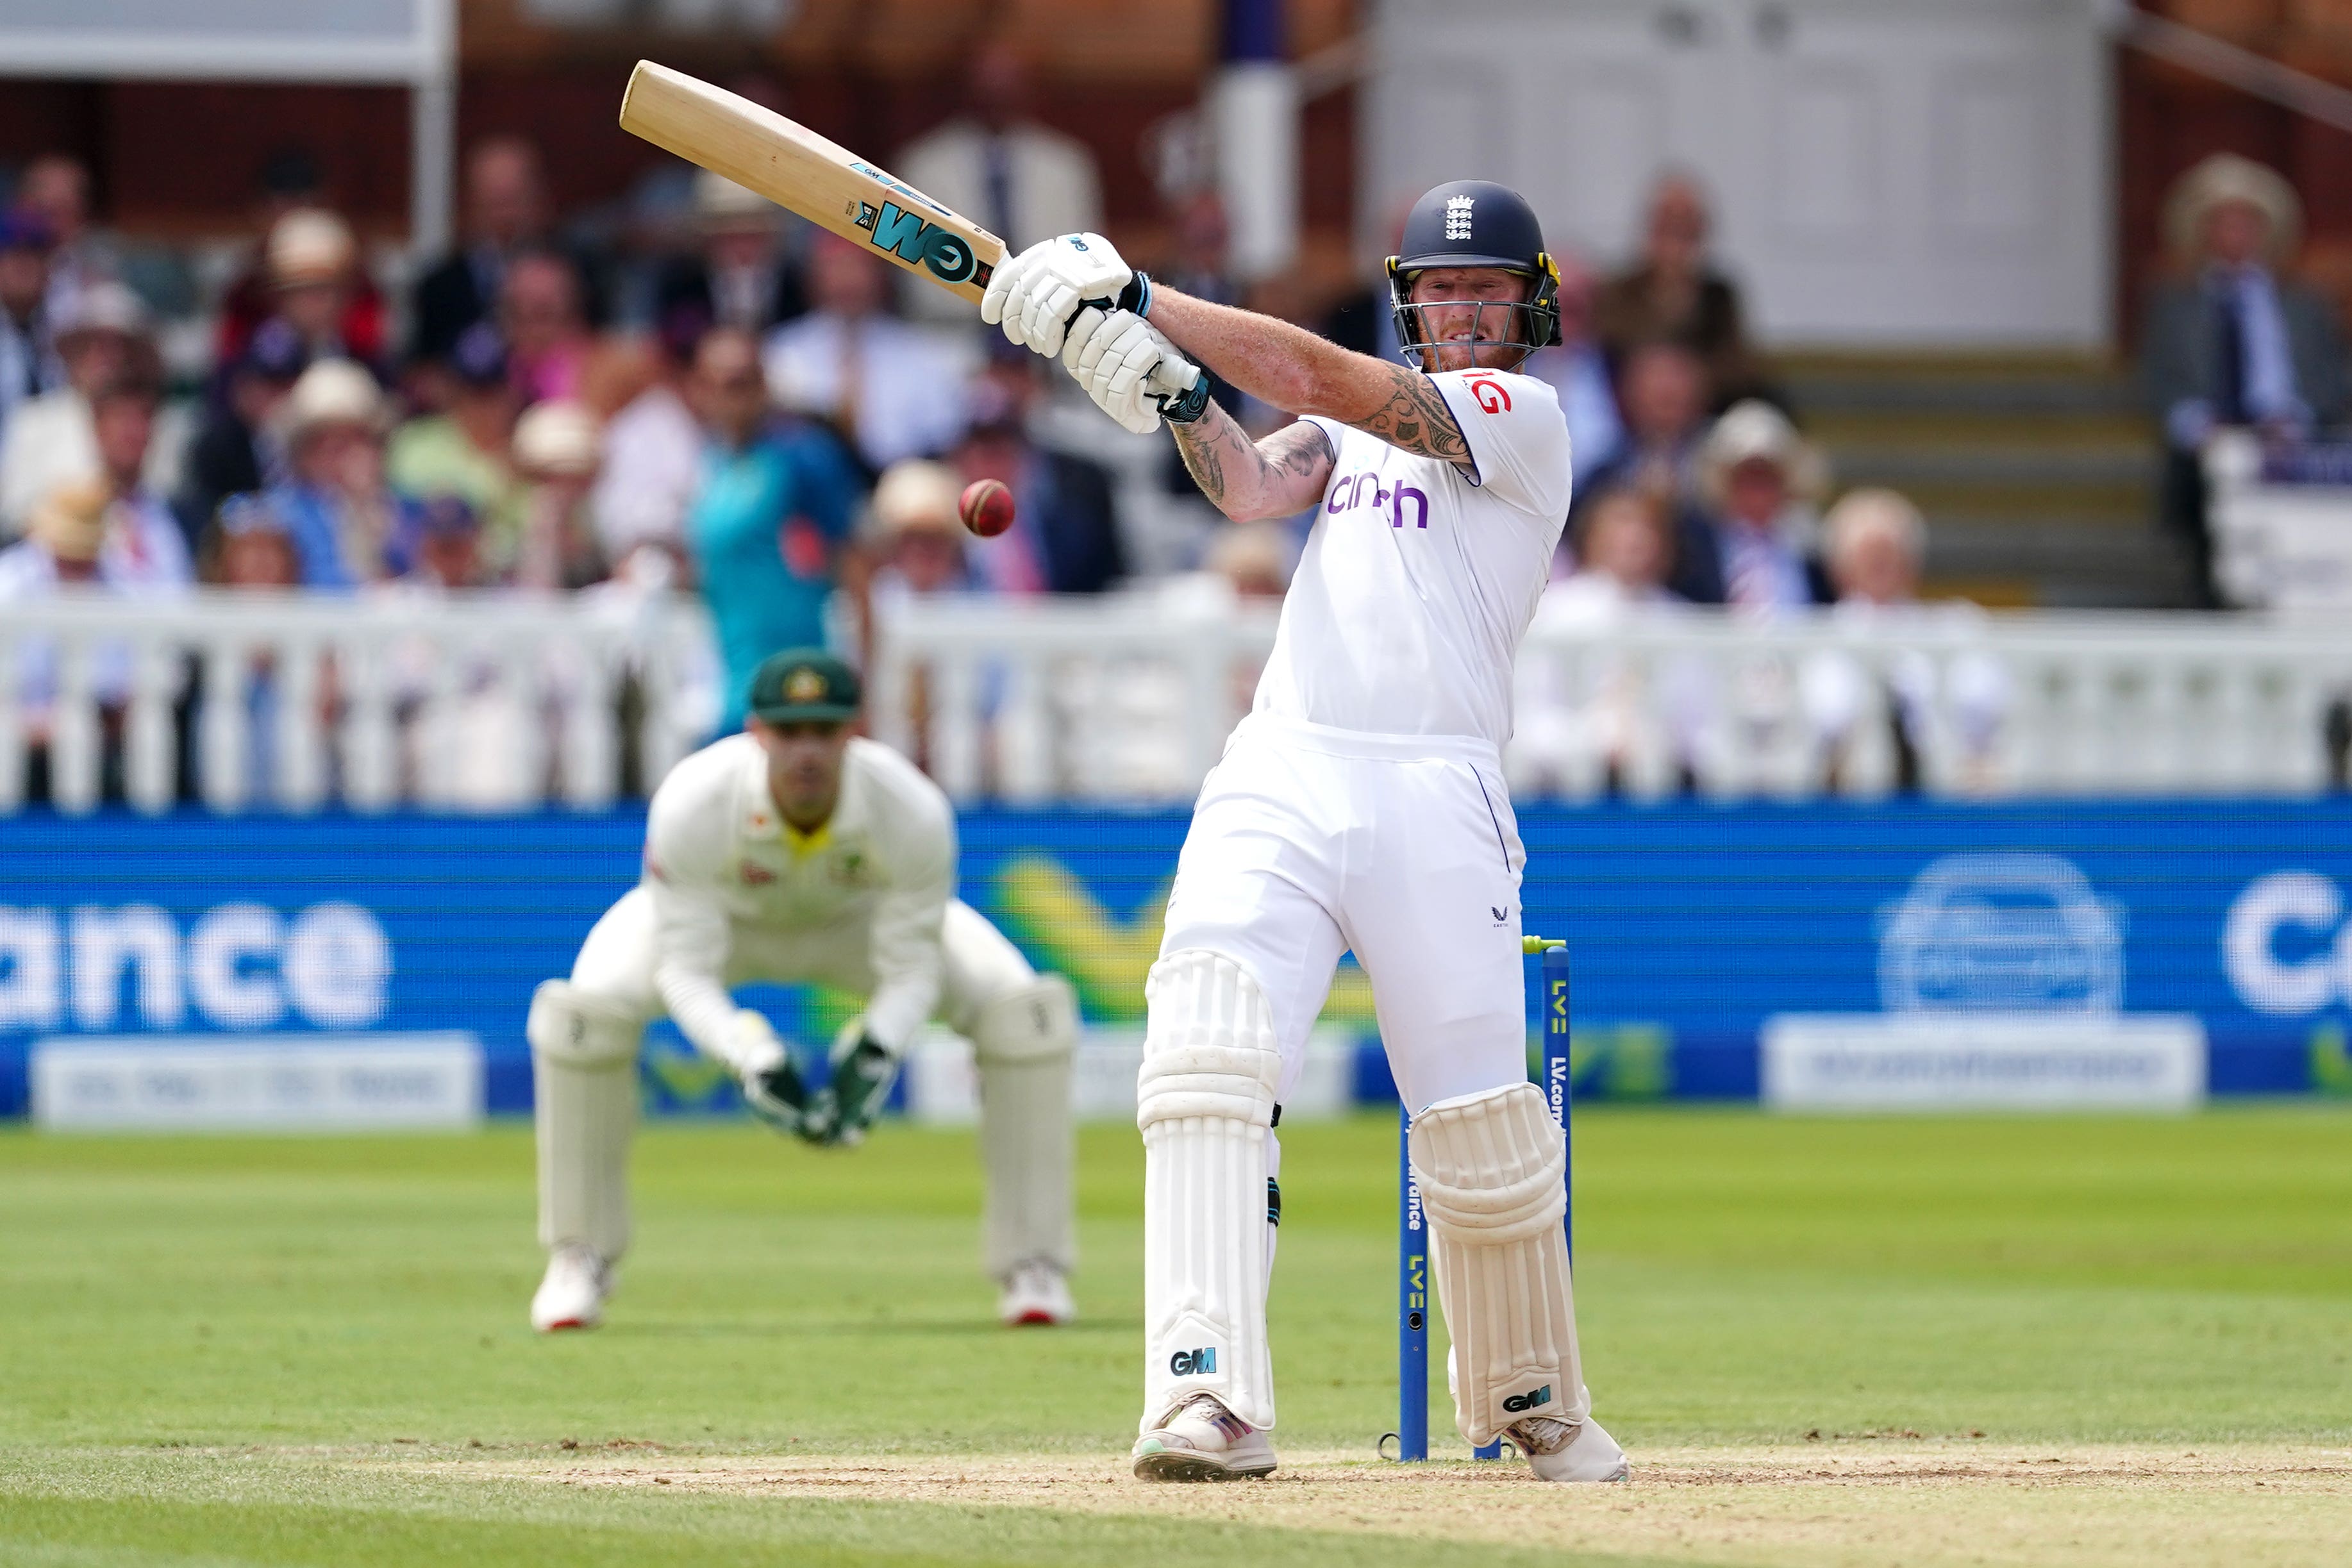 Ben Stokes scored a brilliant hundred for England at Lord’s (Mike Egerton/PA)